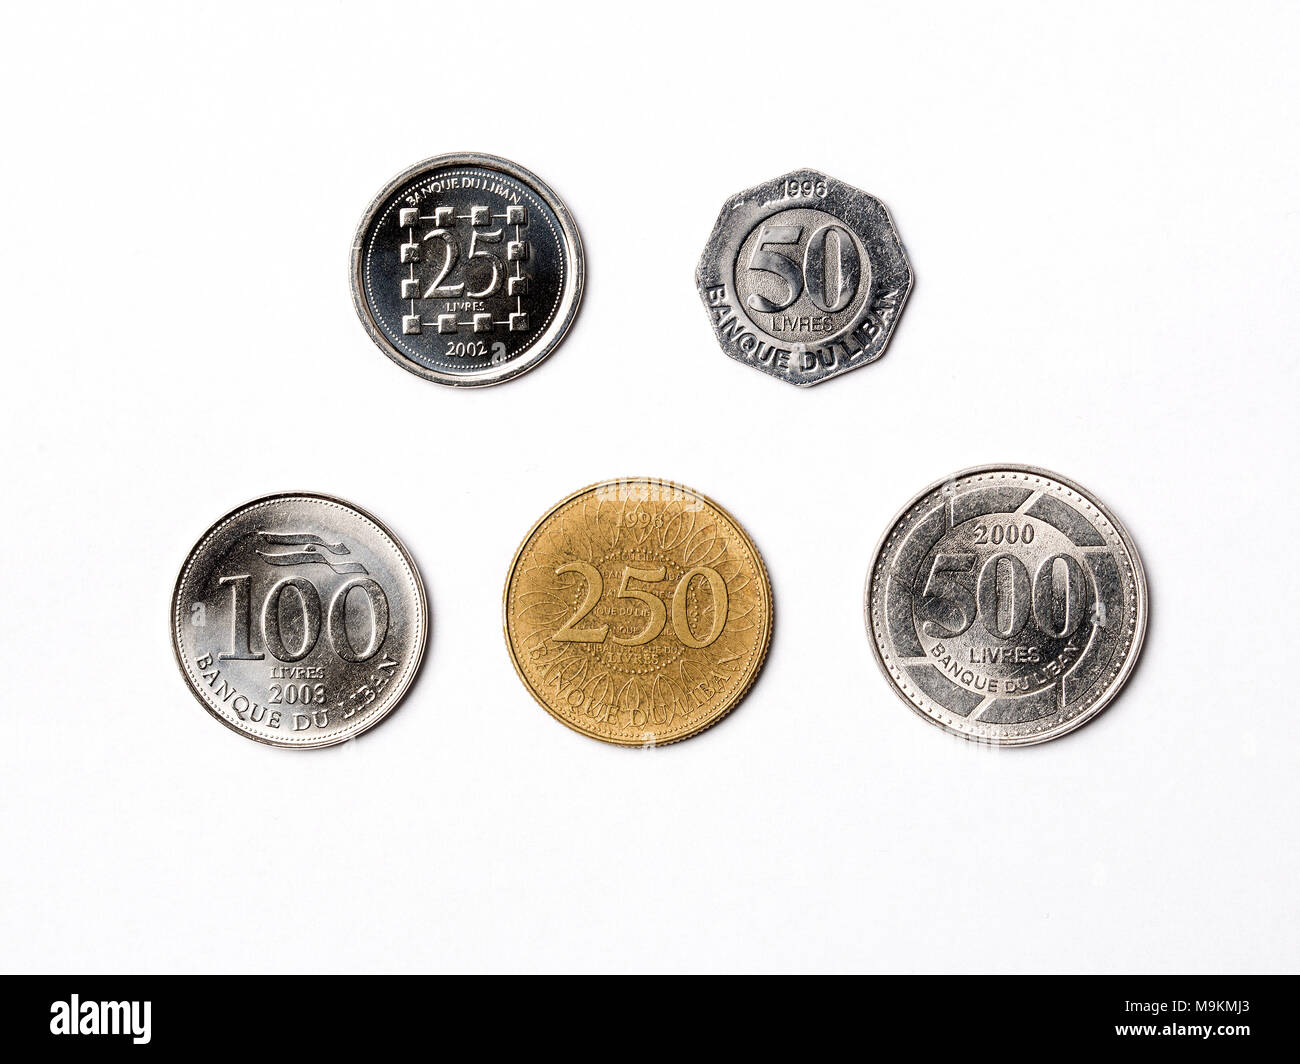 Lebanese coins on a white background Stock Photo